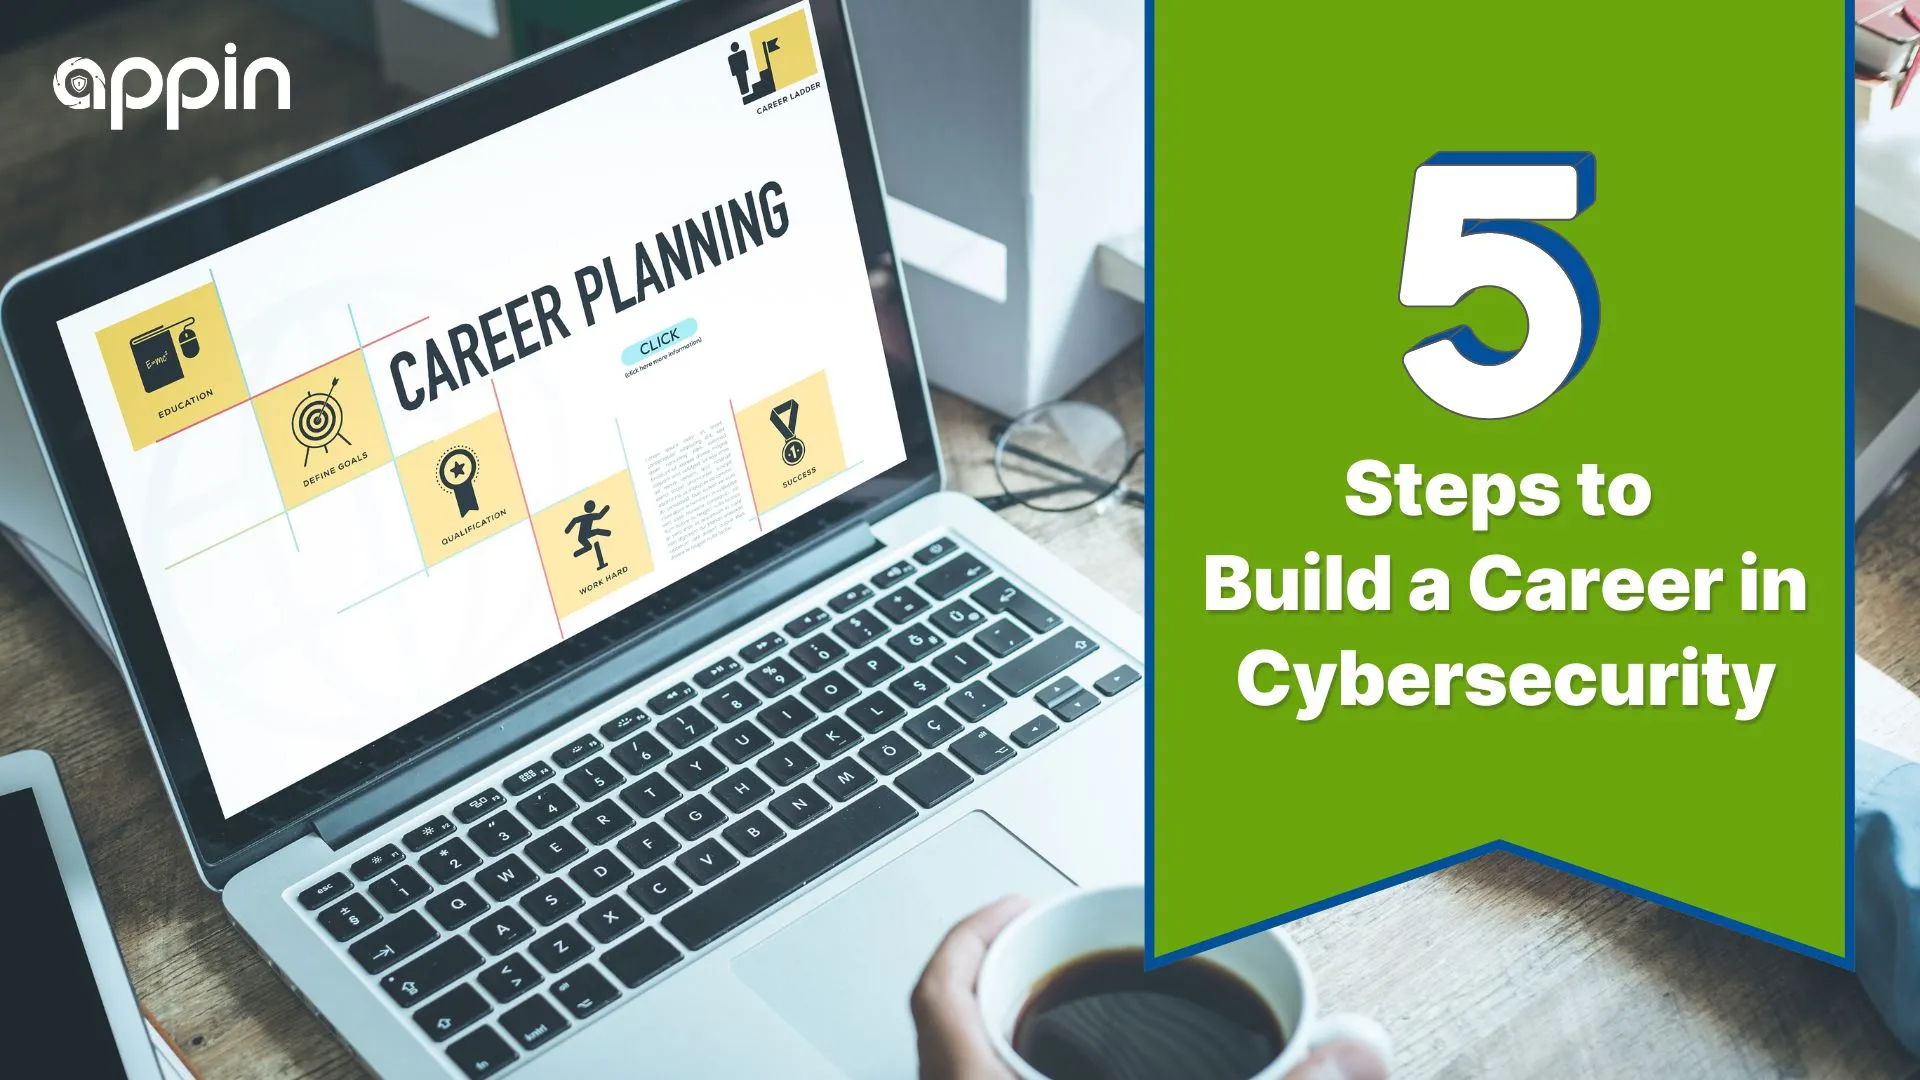 Build a Career in Cybersecurity